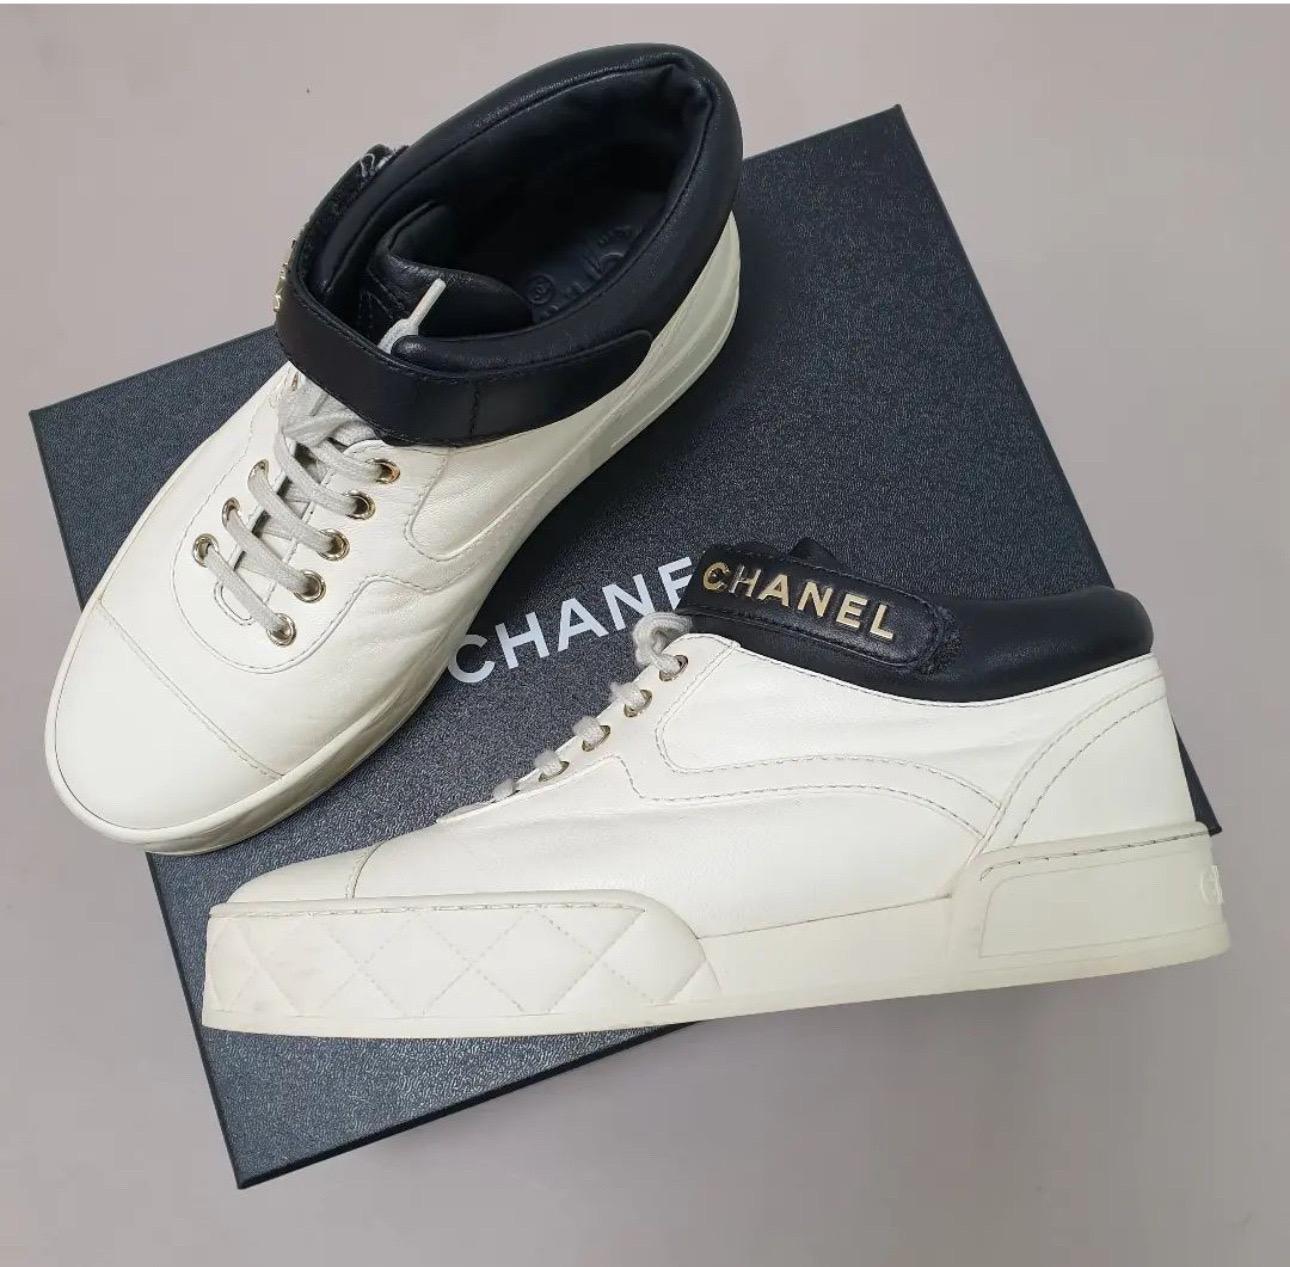 Chanel Coco Mark Leather Trainers Sneakers In Good Condition For Sale In Krakow, PL